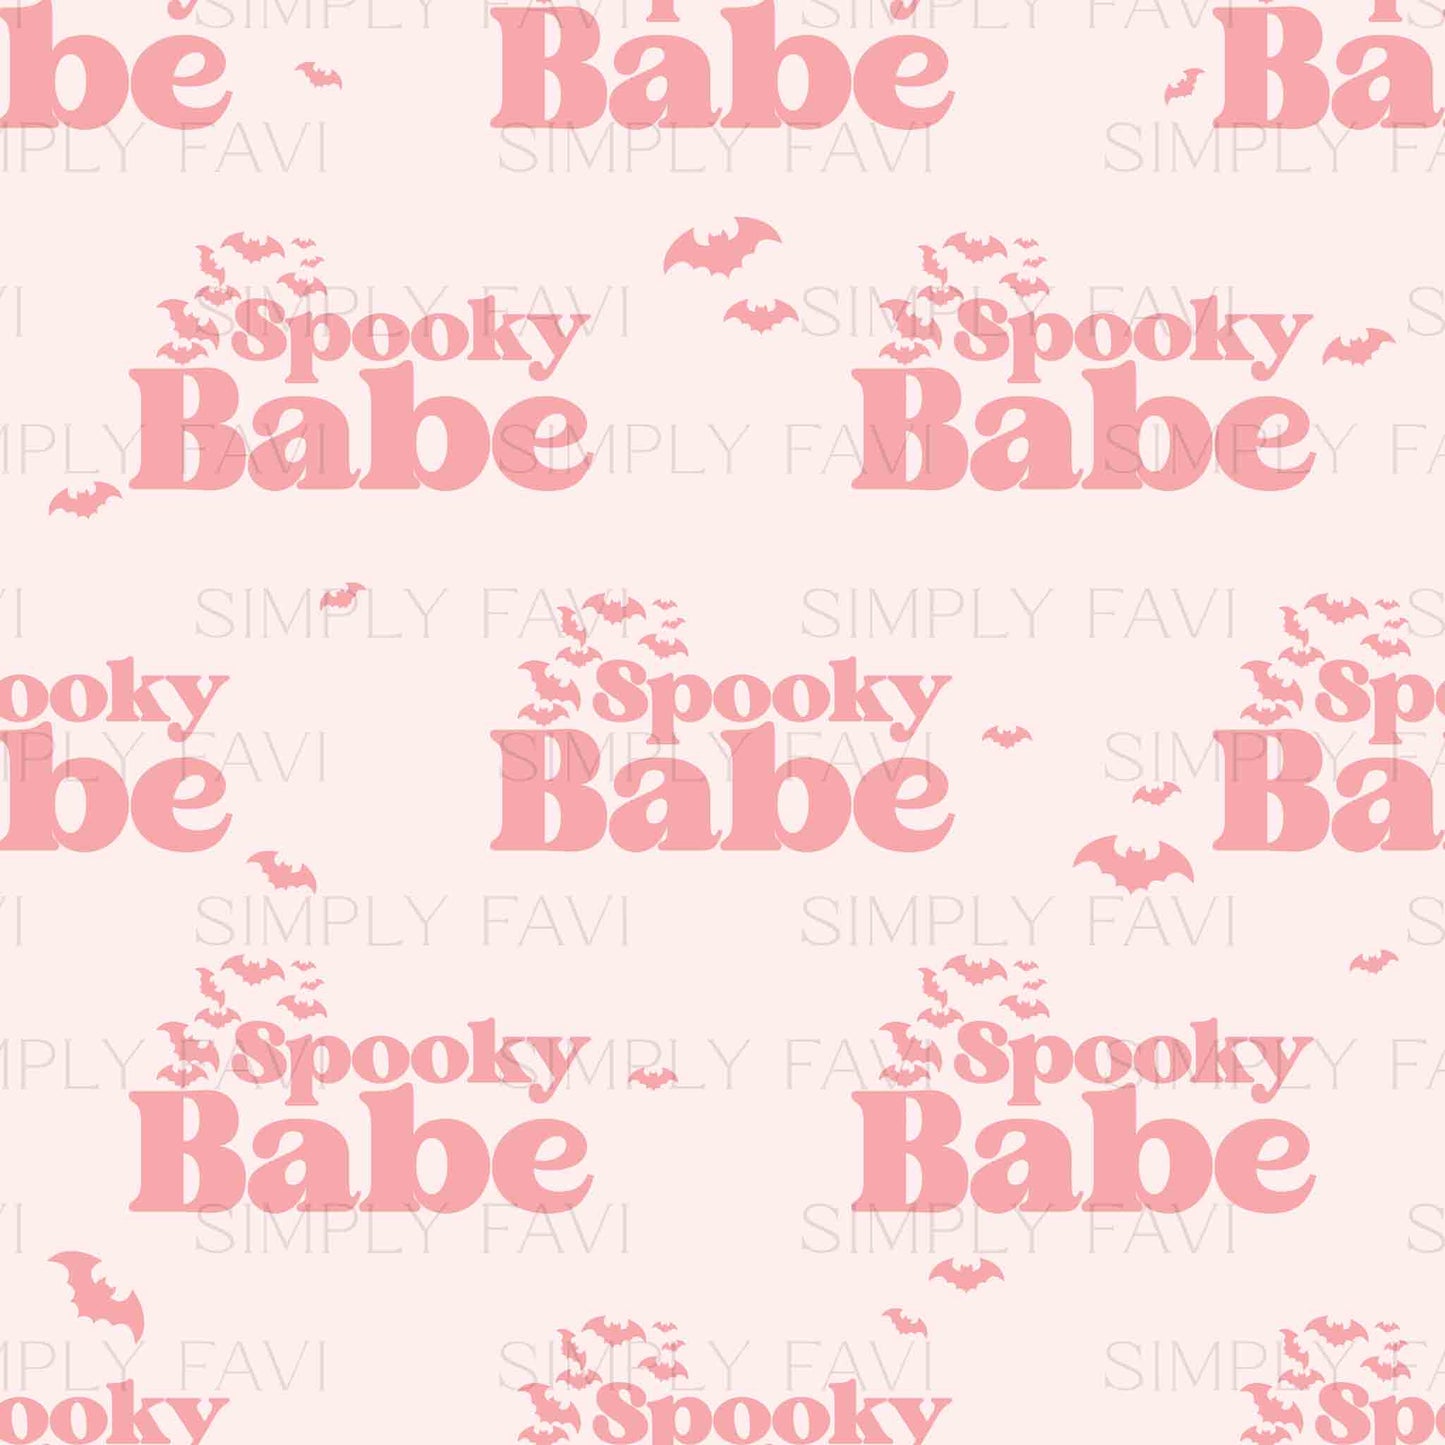 Spooky Babe (set of 8)